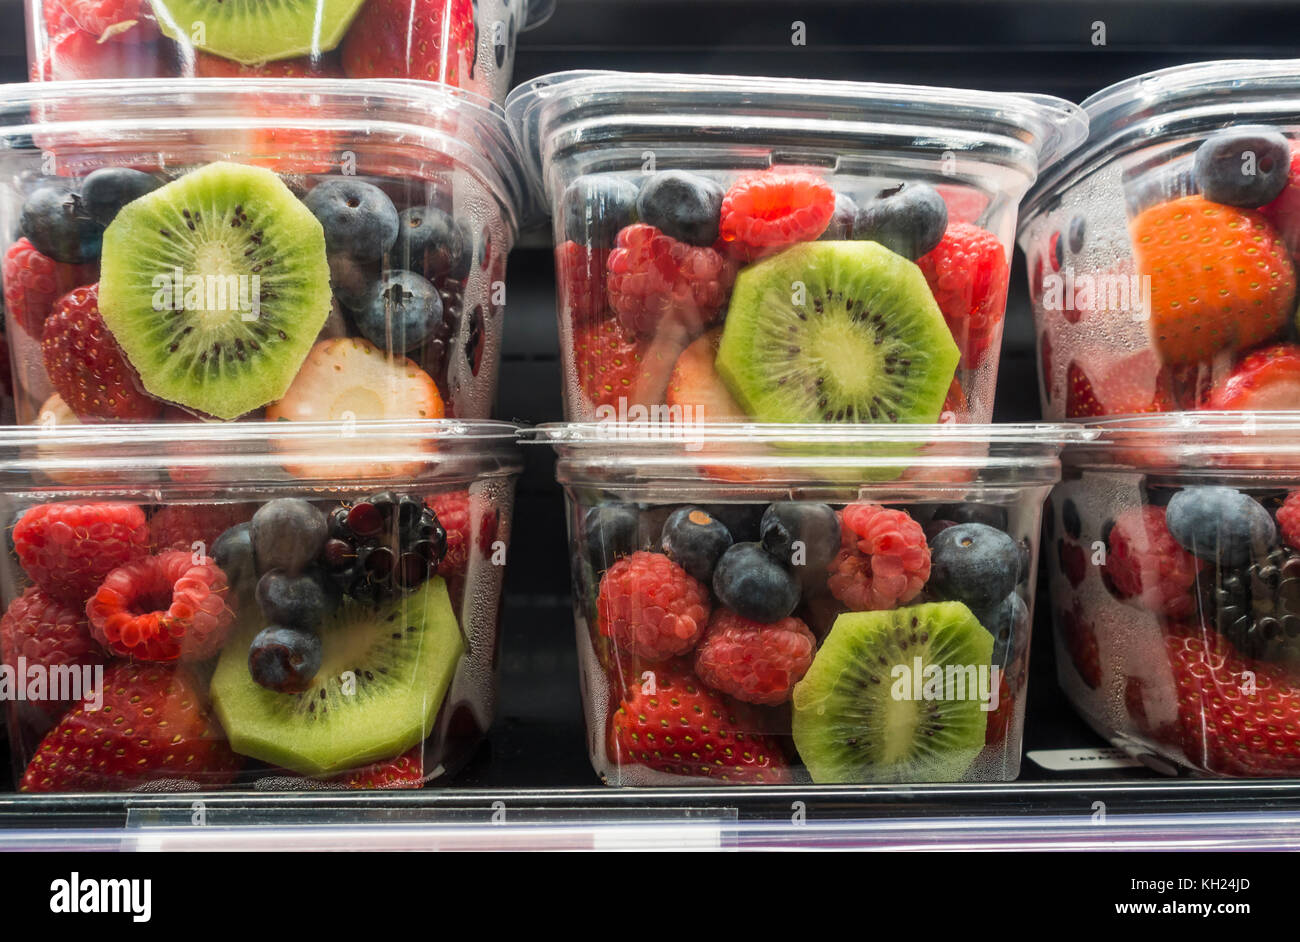 https://c8.alamy.com/comp/KH24JD/clear-plastic-containers-of-mixed-cut-fresh-fruit-on-the-shelf-in-KH24JD.jpg